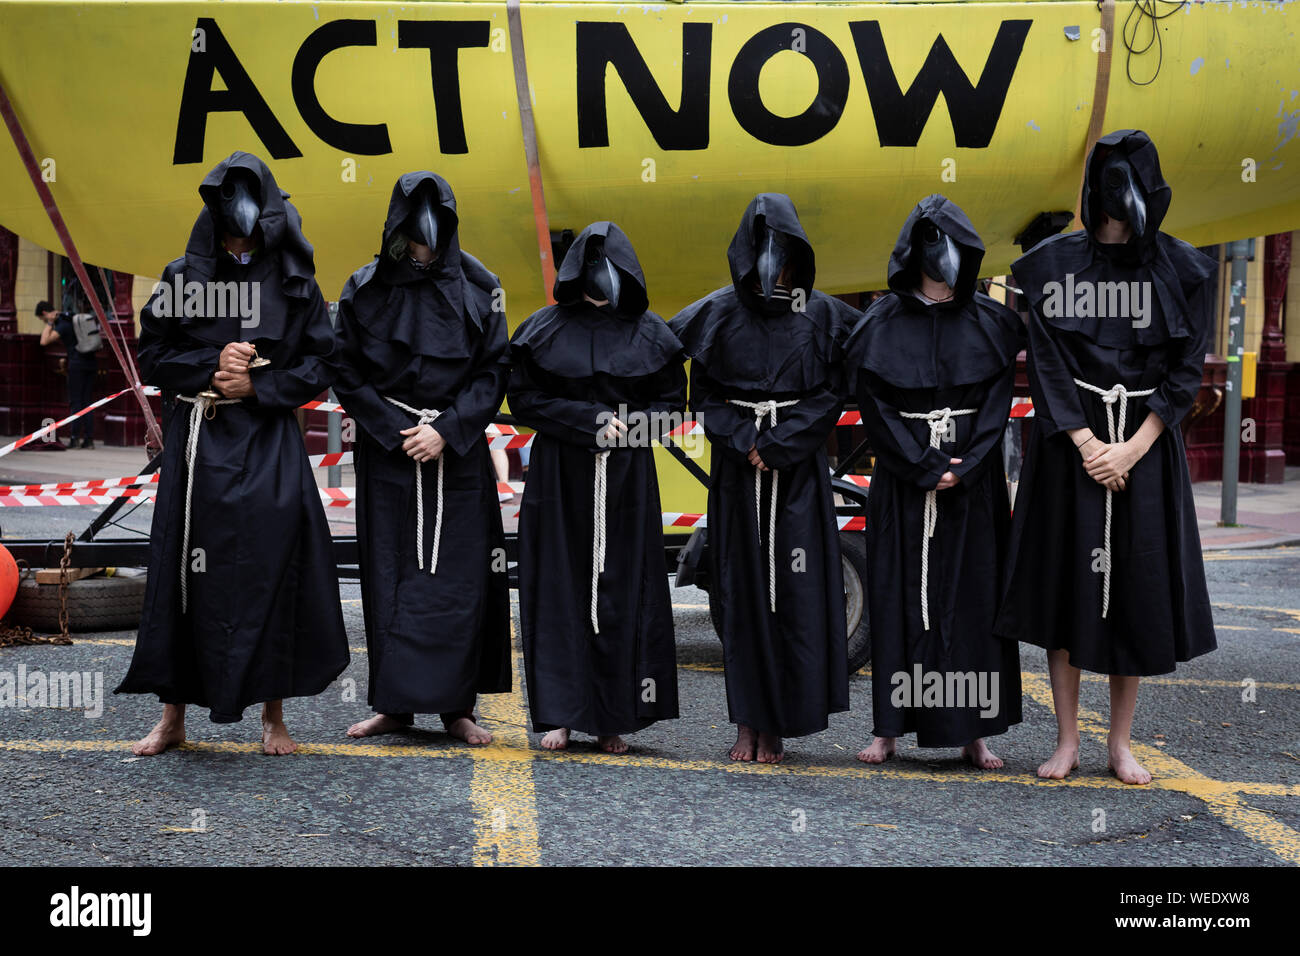 Manchester, UK. 30th Aug, 2019. The Extinction Rebellion movement occupied one of the major transport routes through the city this morning. Deansgate, came to a standstill as protesters and a boat blocked the streets in pursuit for peaceful action to create changes needed to overcome climate change. Credit: Andy Barton/Alamy Live News Stock Photo